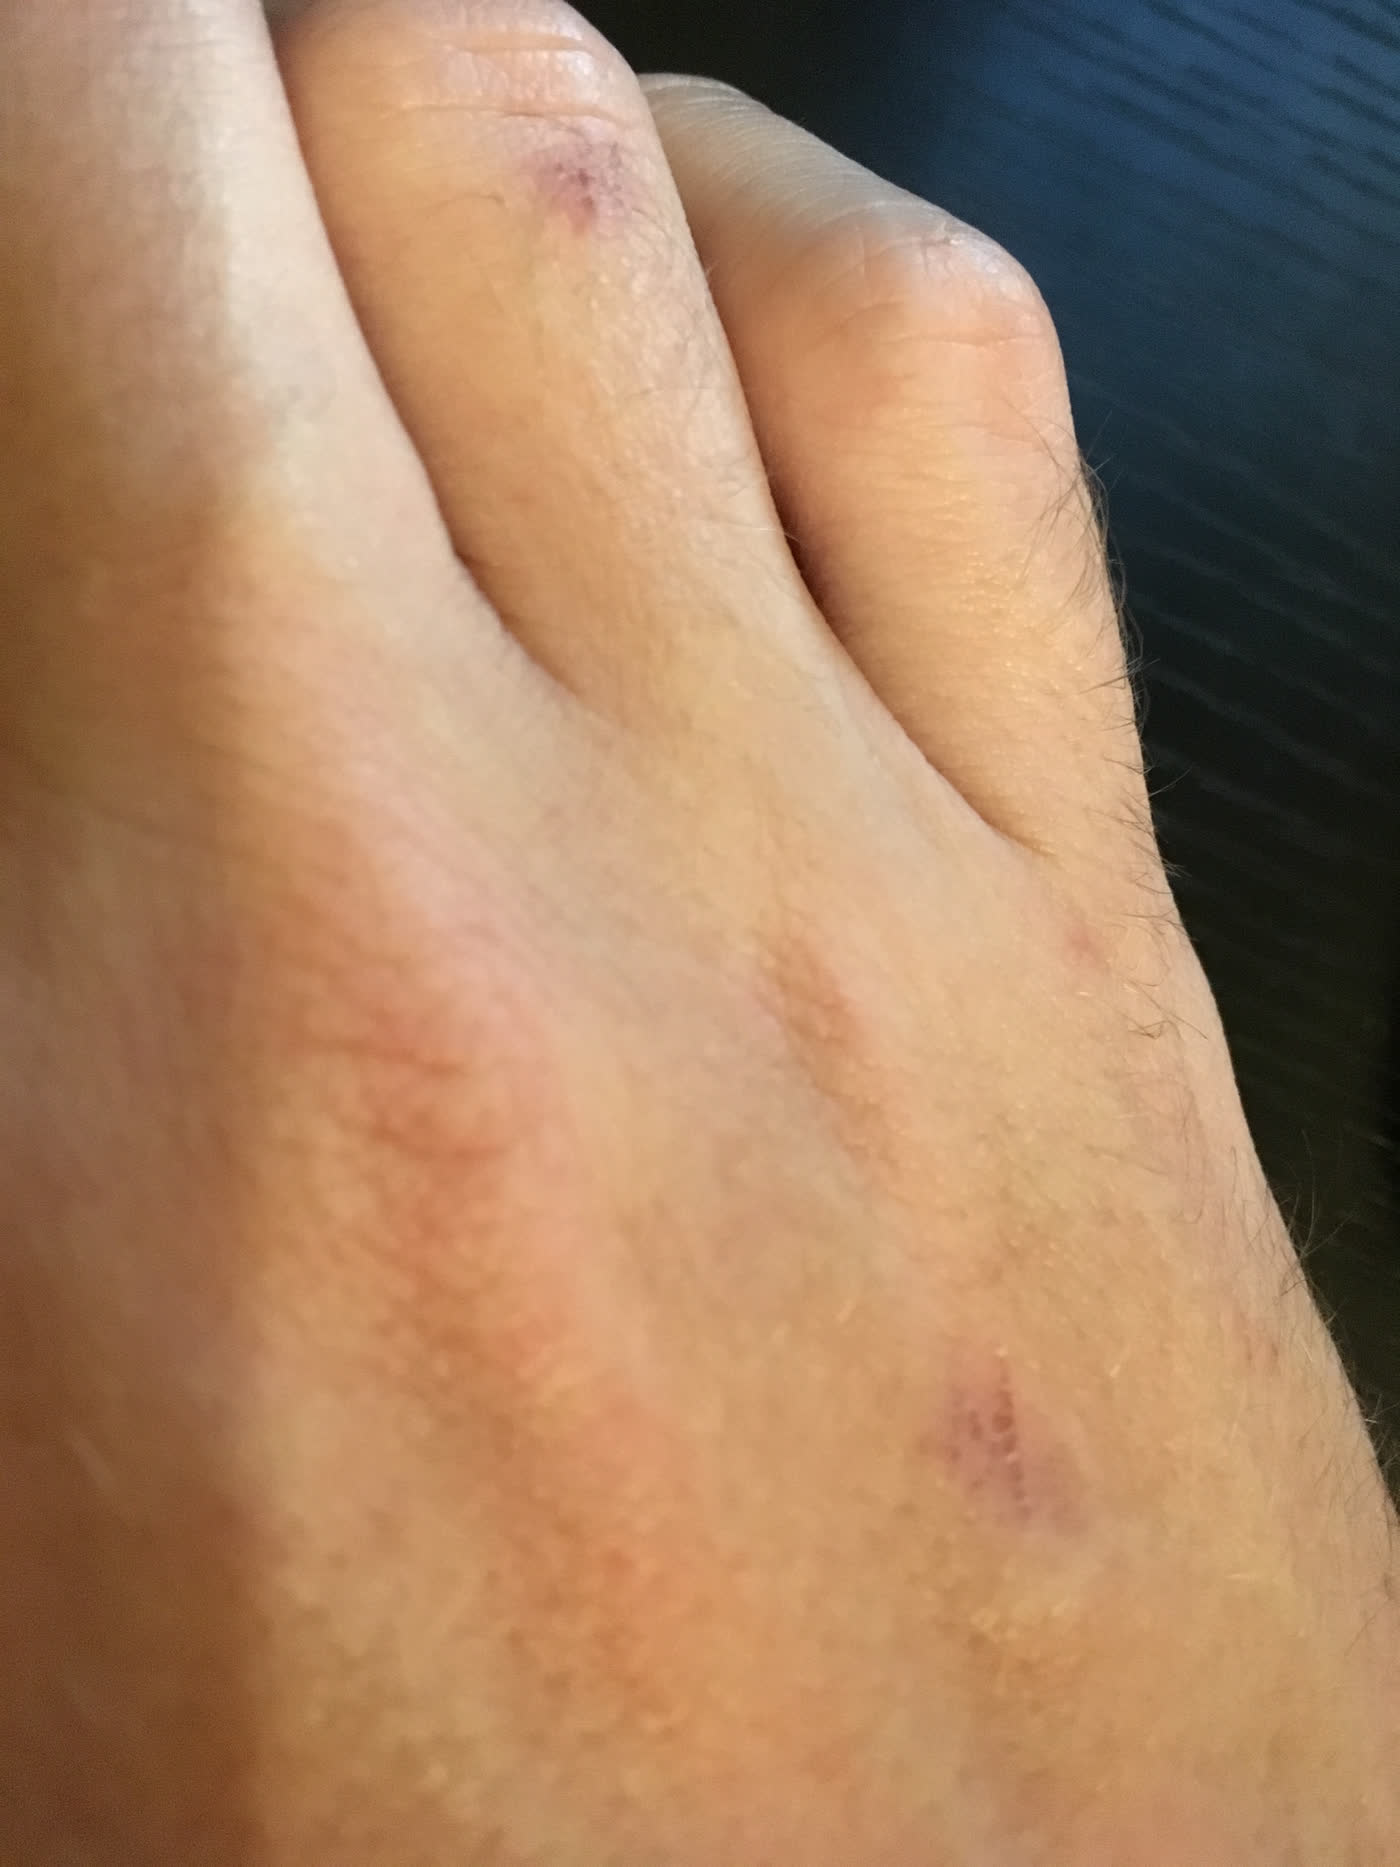 Scratched hand from velcro